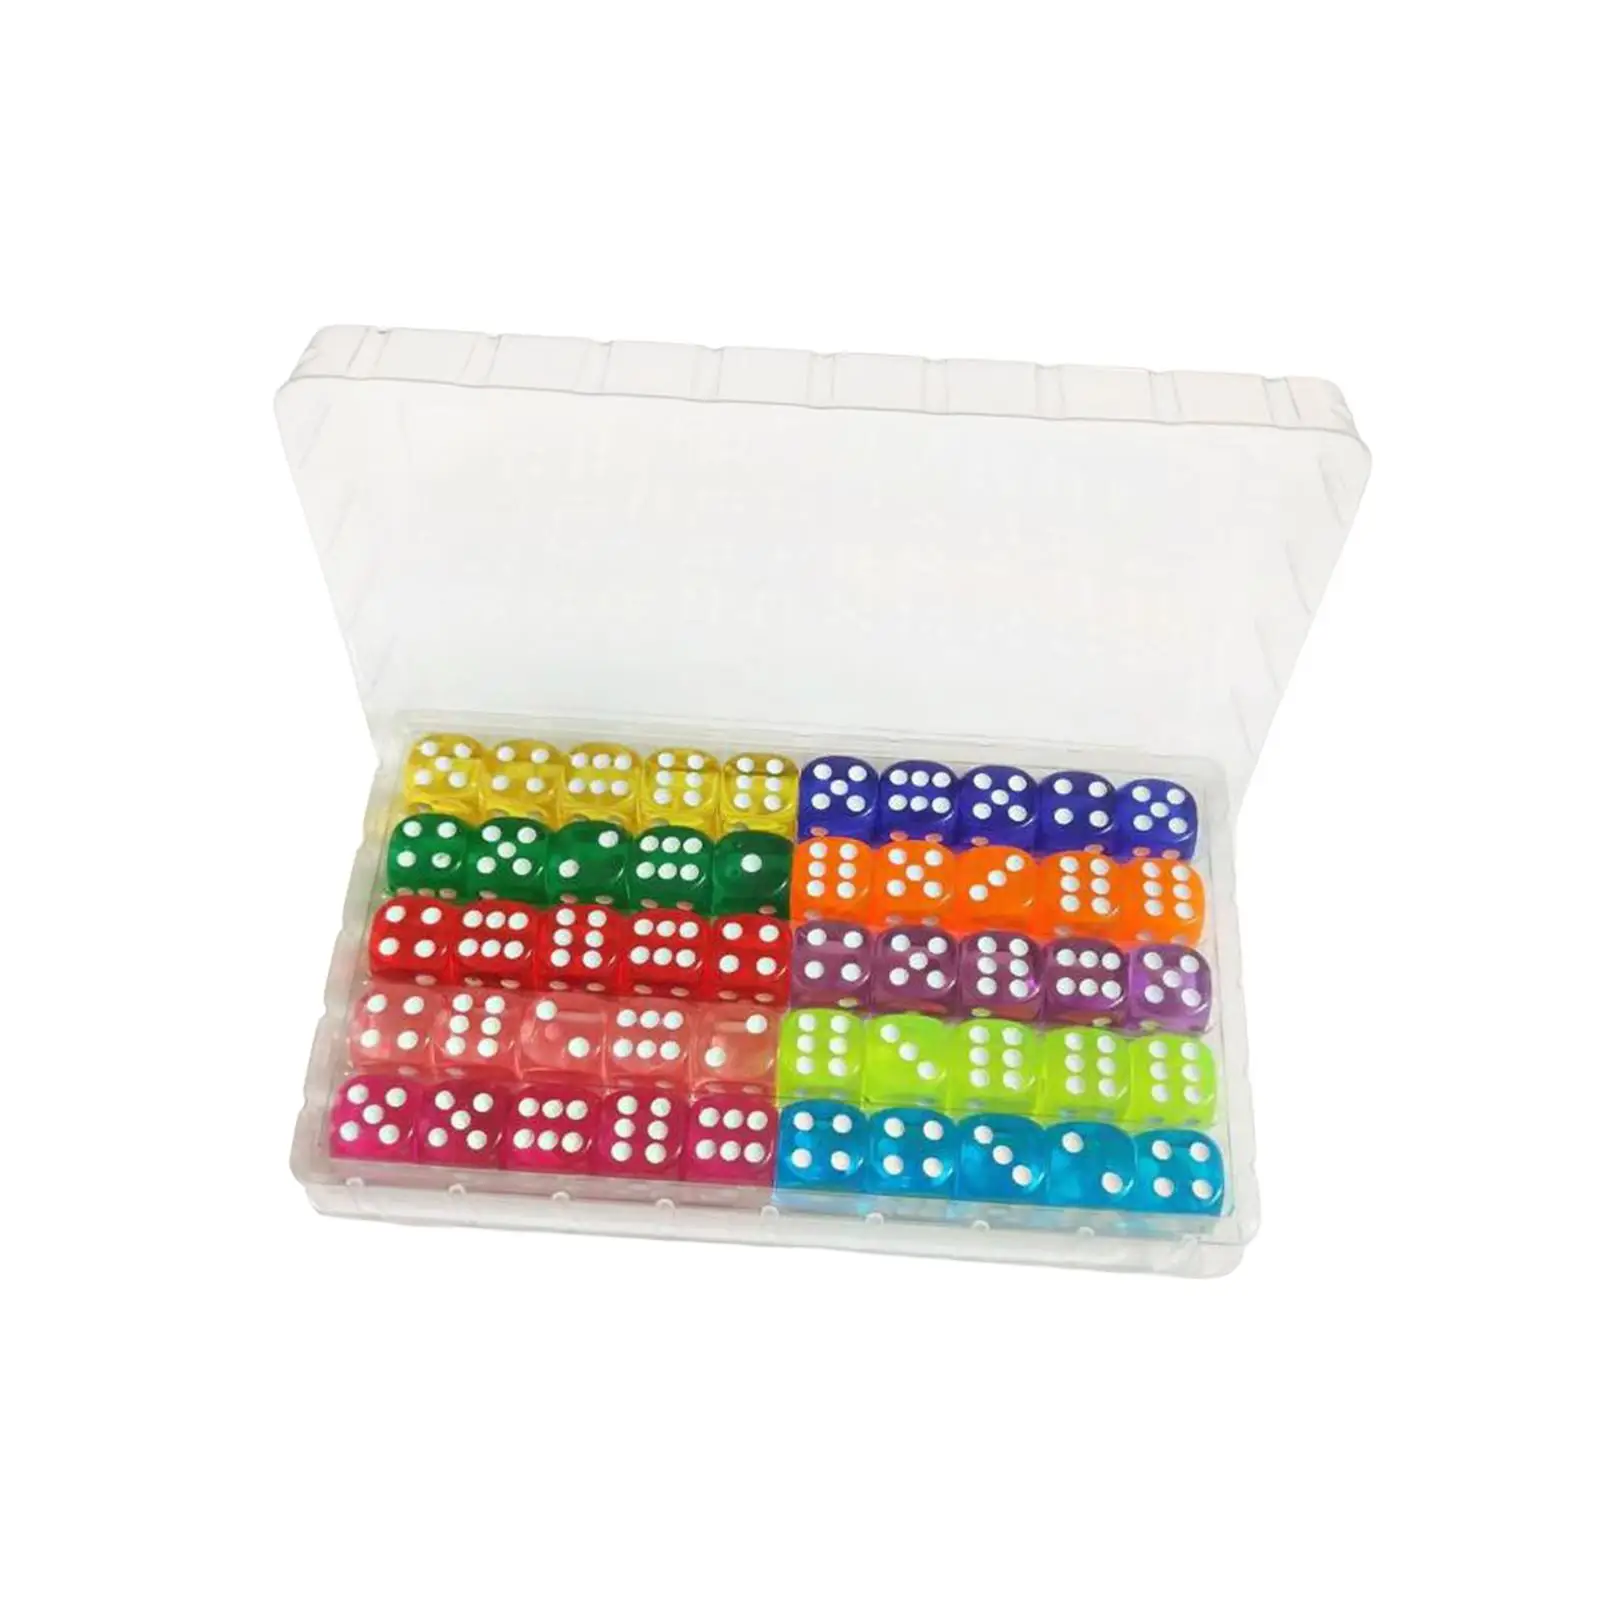 50x 6 Sided Dices Party Favors Entertainment Toys 16mm Dices Math Counting Teaching Aids Game Dices for Bar Card Game Board Game